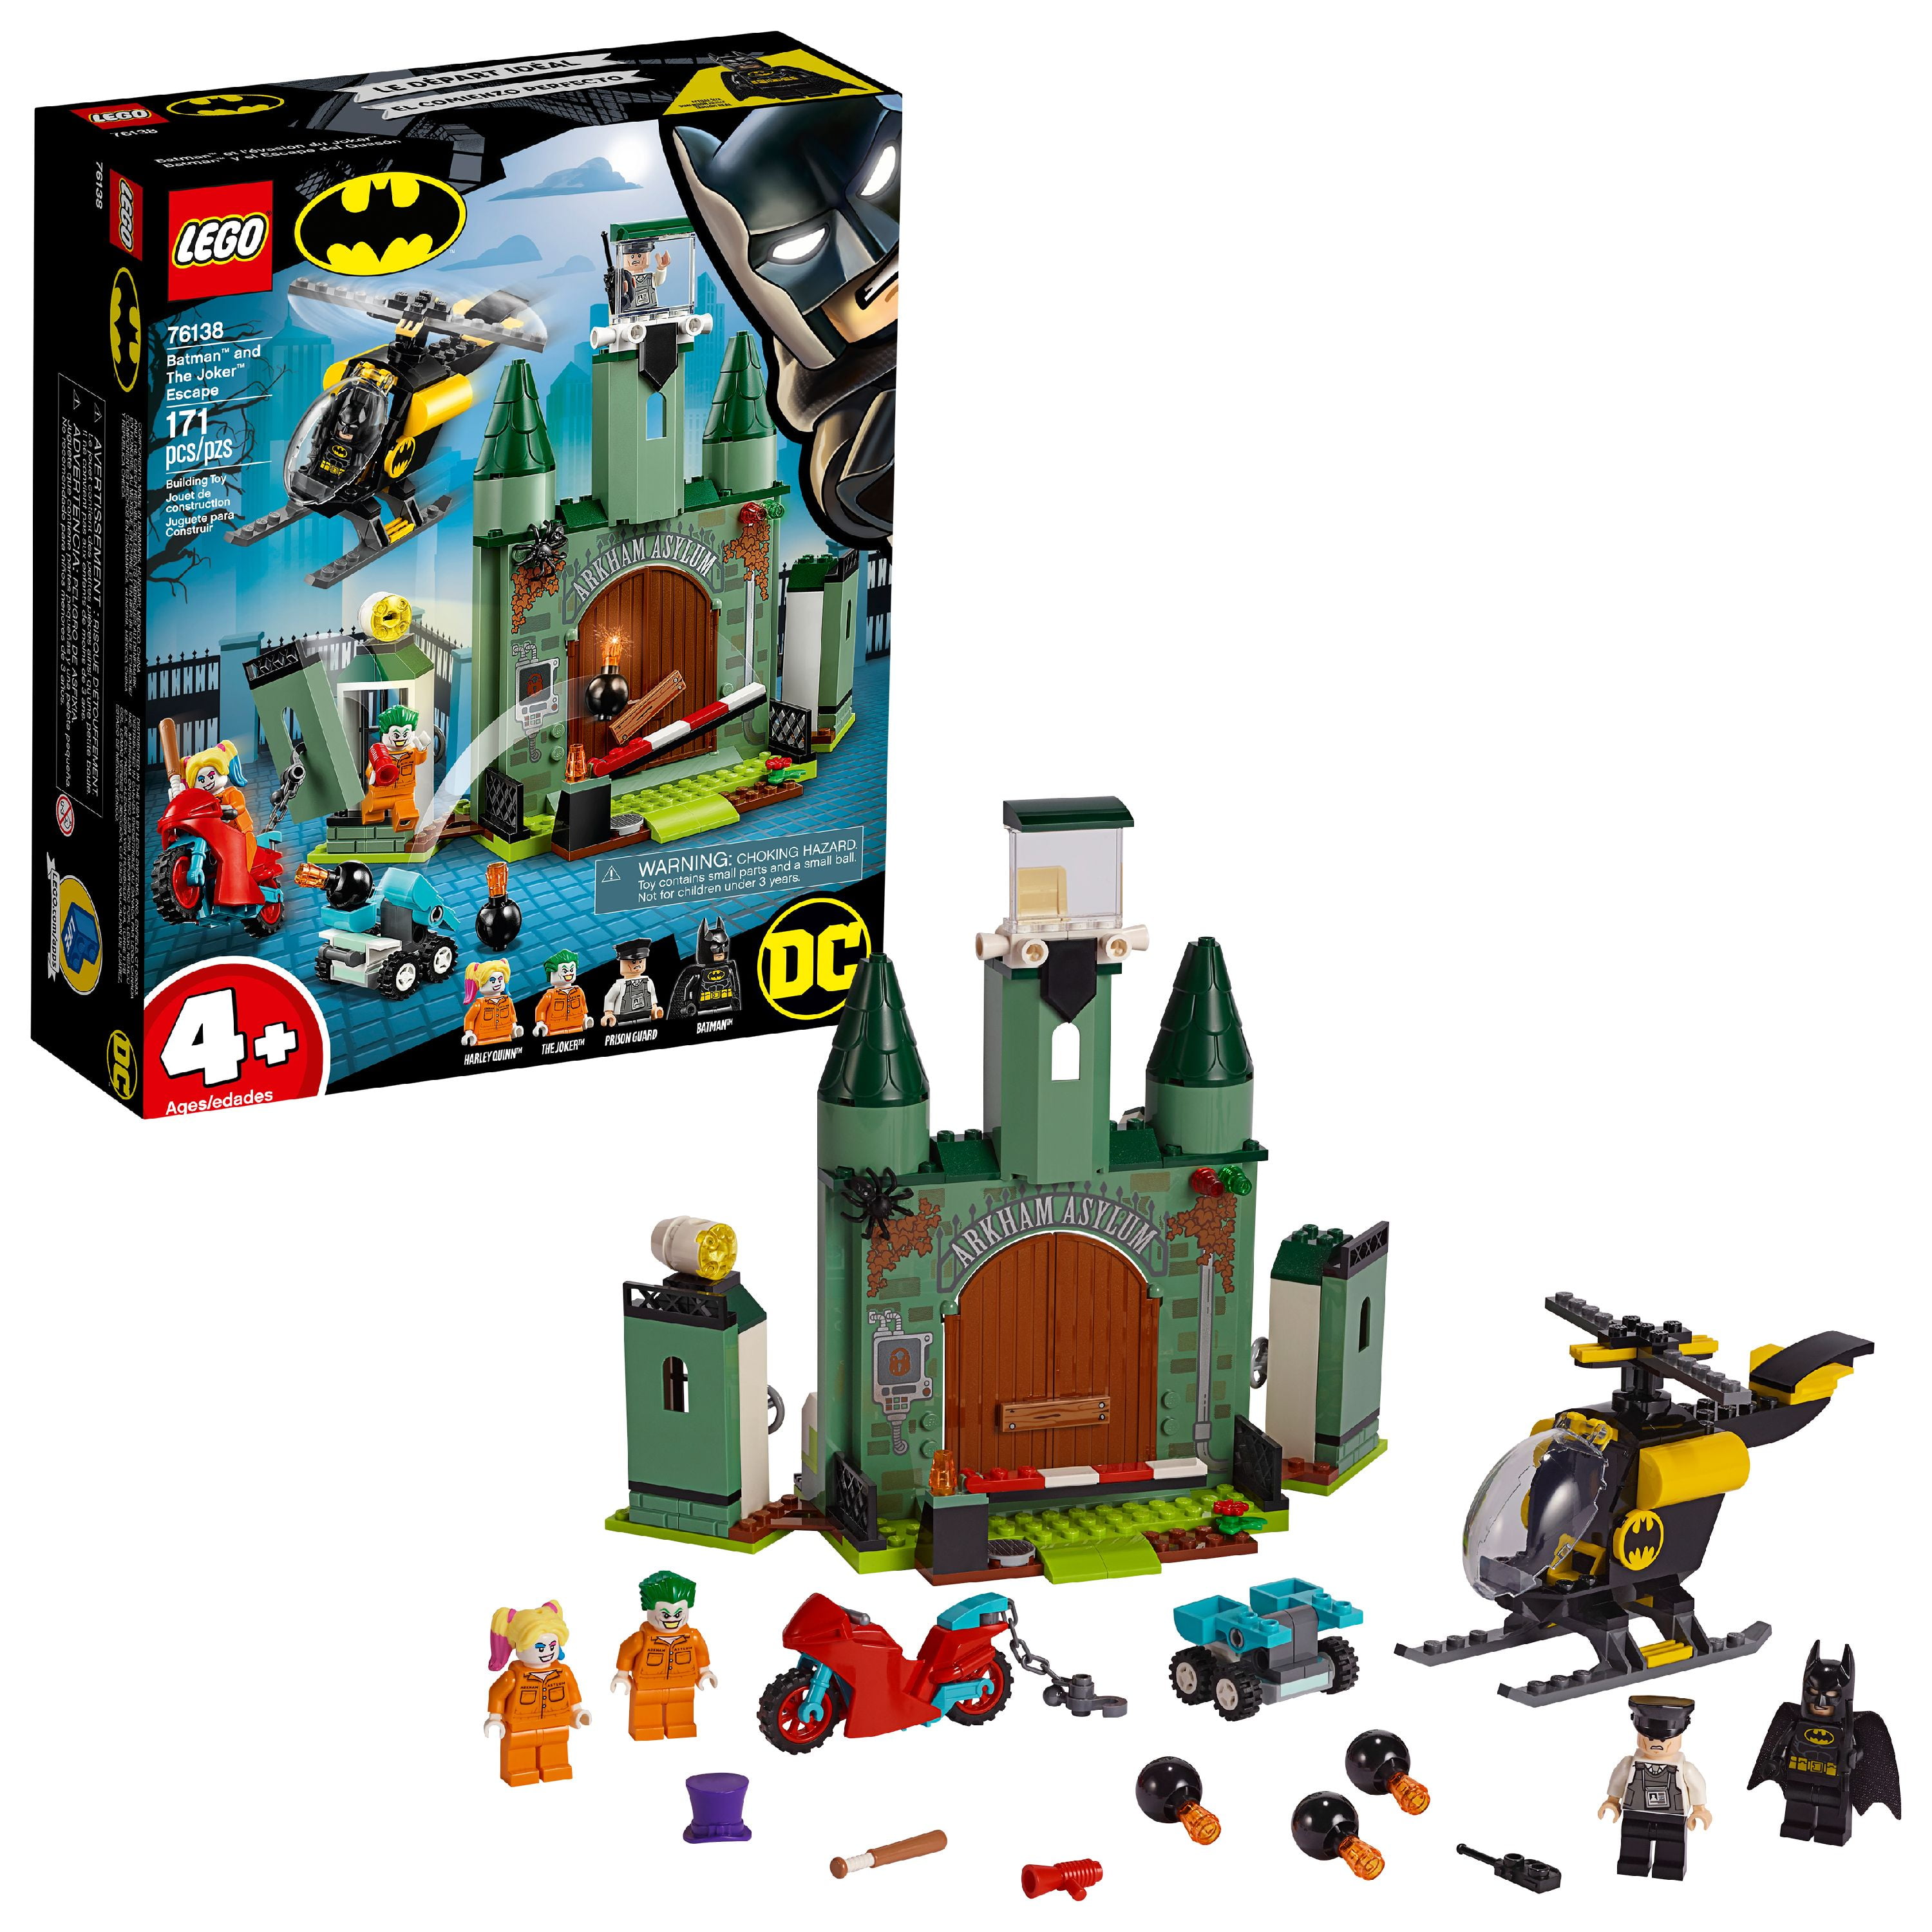 Lego Batman Movie Top 5 Biggest Sets of all Time - Lego Speed